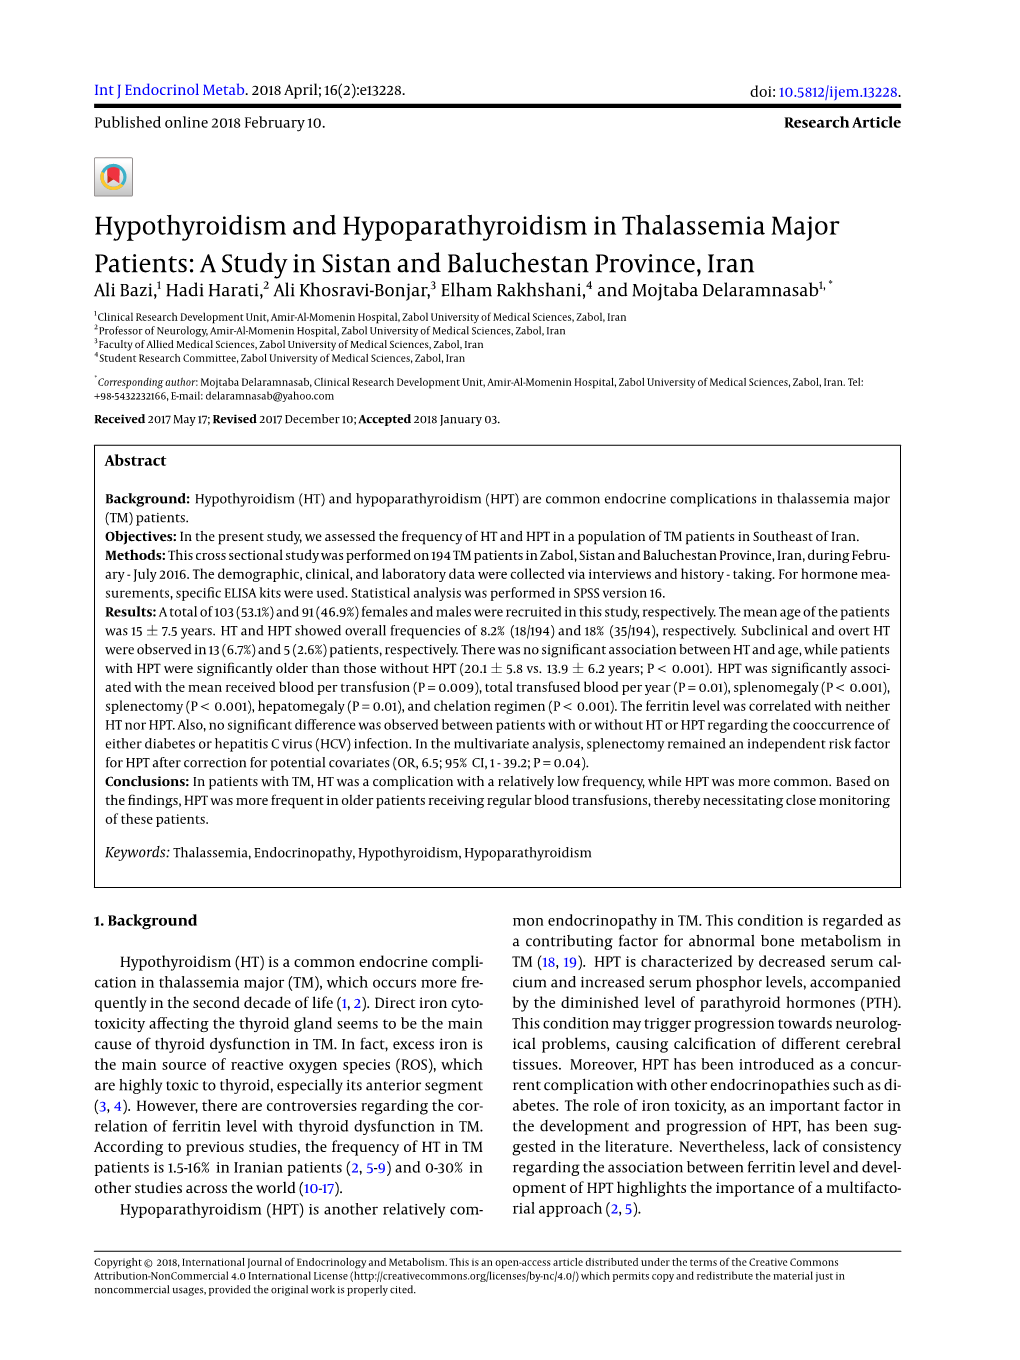 Hypothyroidism and Hypoparathyroidism in Thalassemia Major Patients